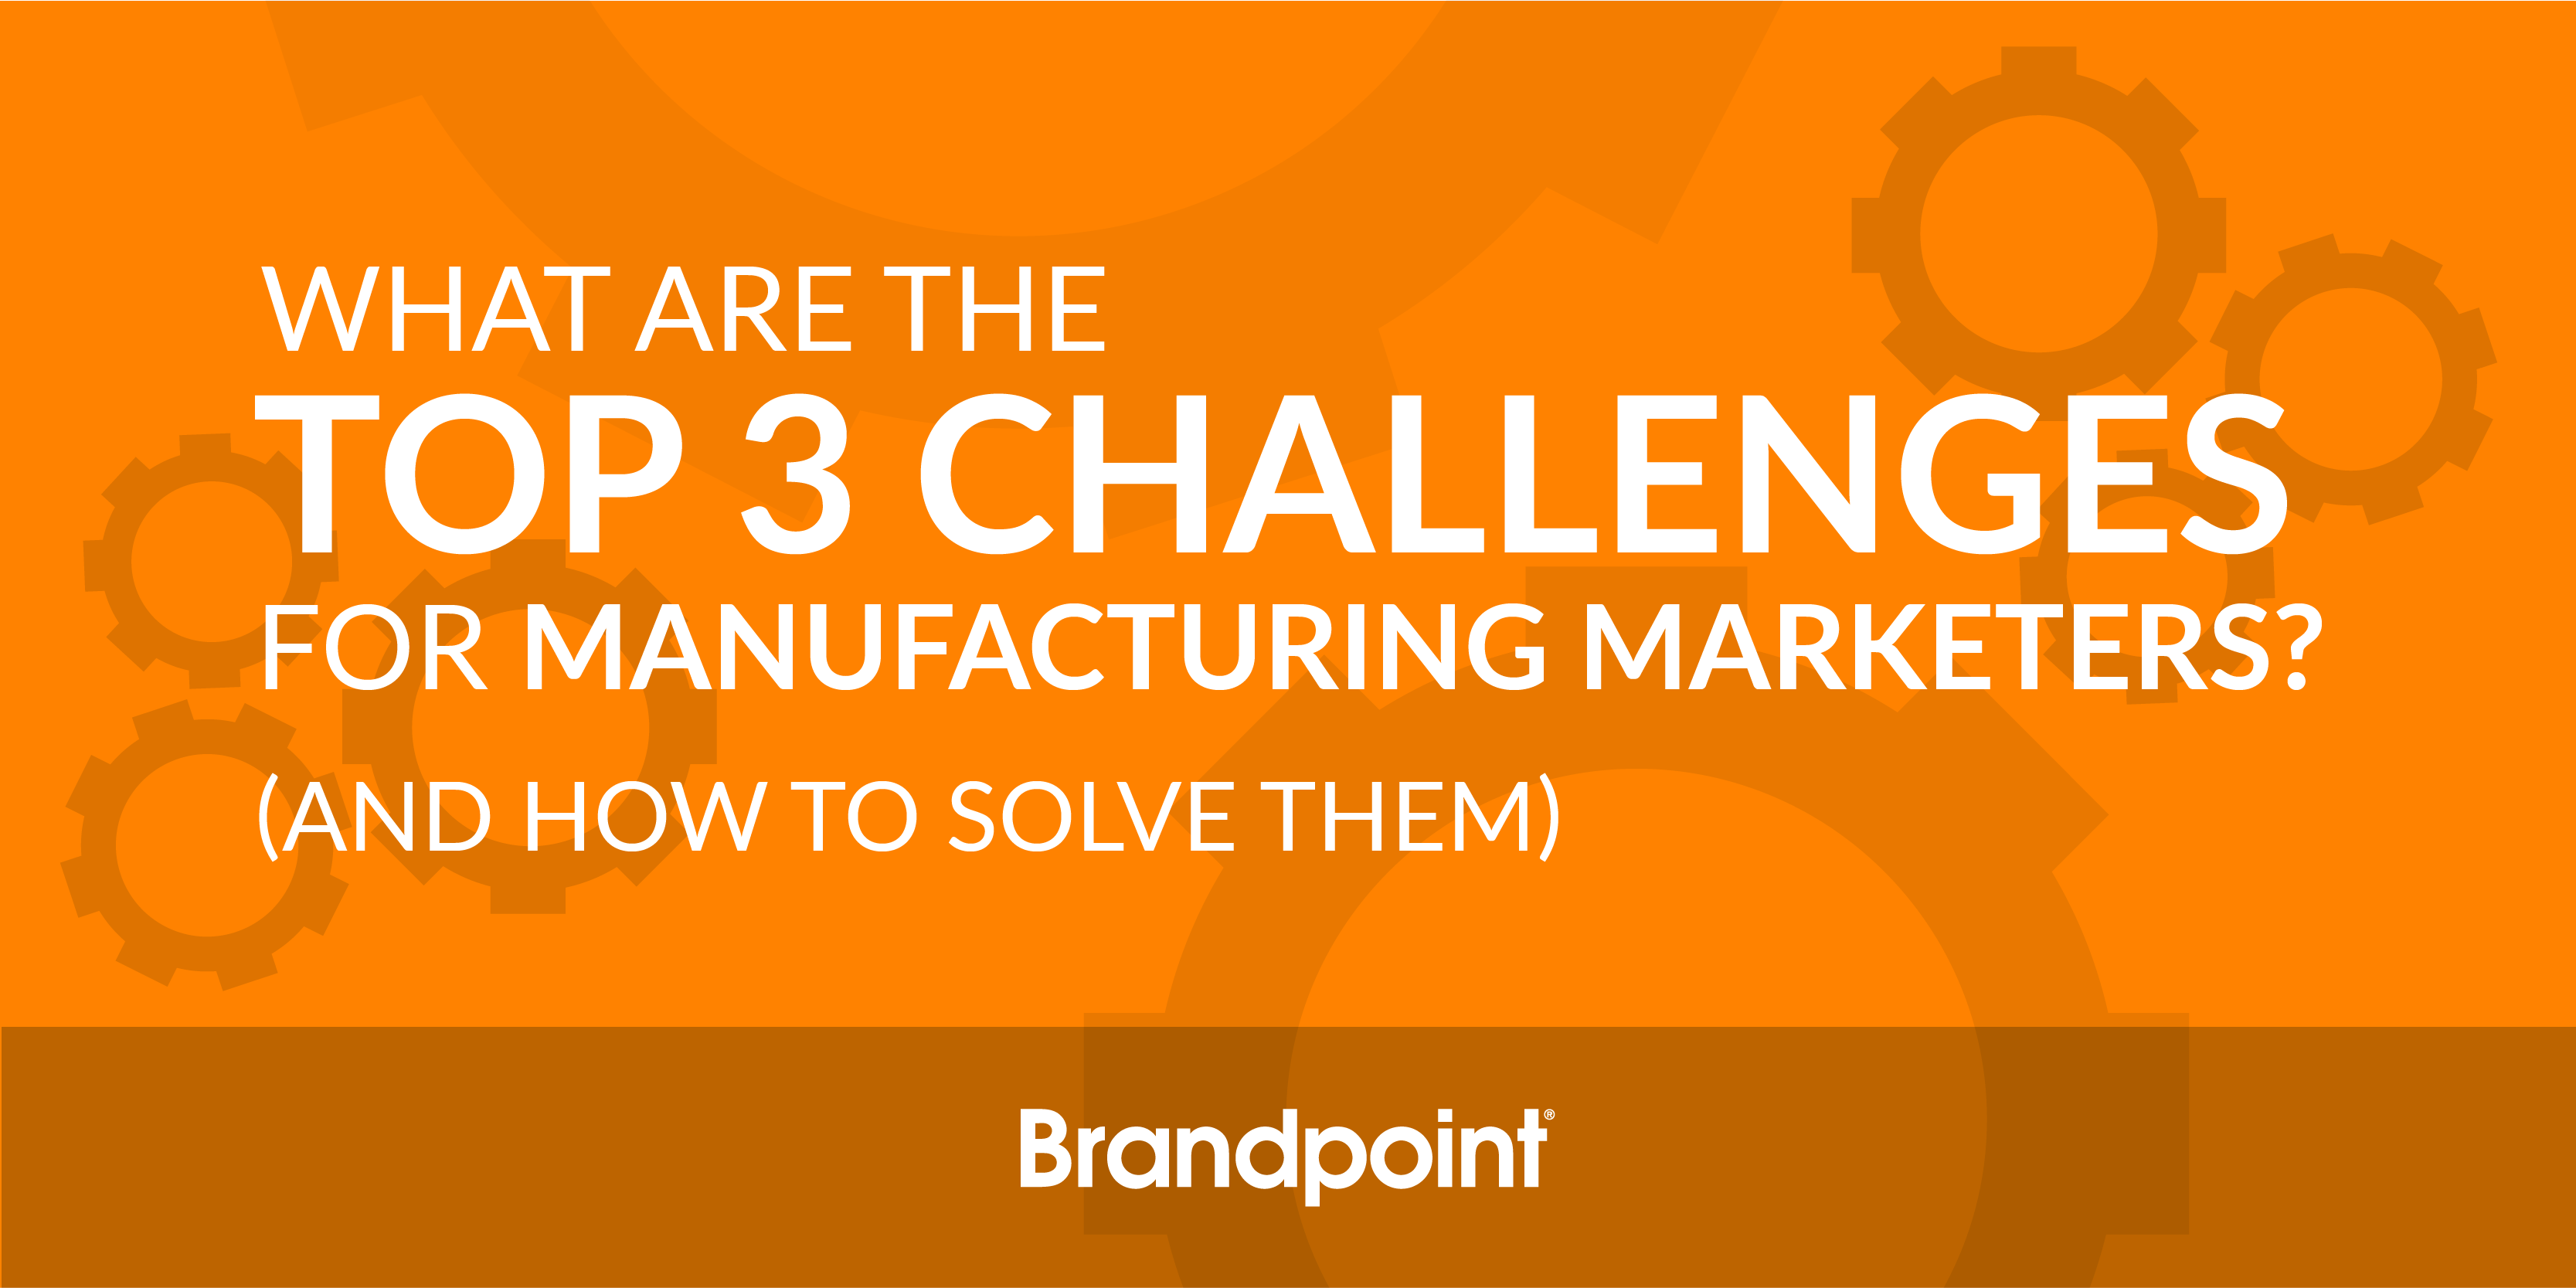 the top 3 challenges for manufacturing marketers